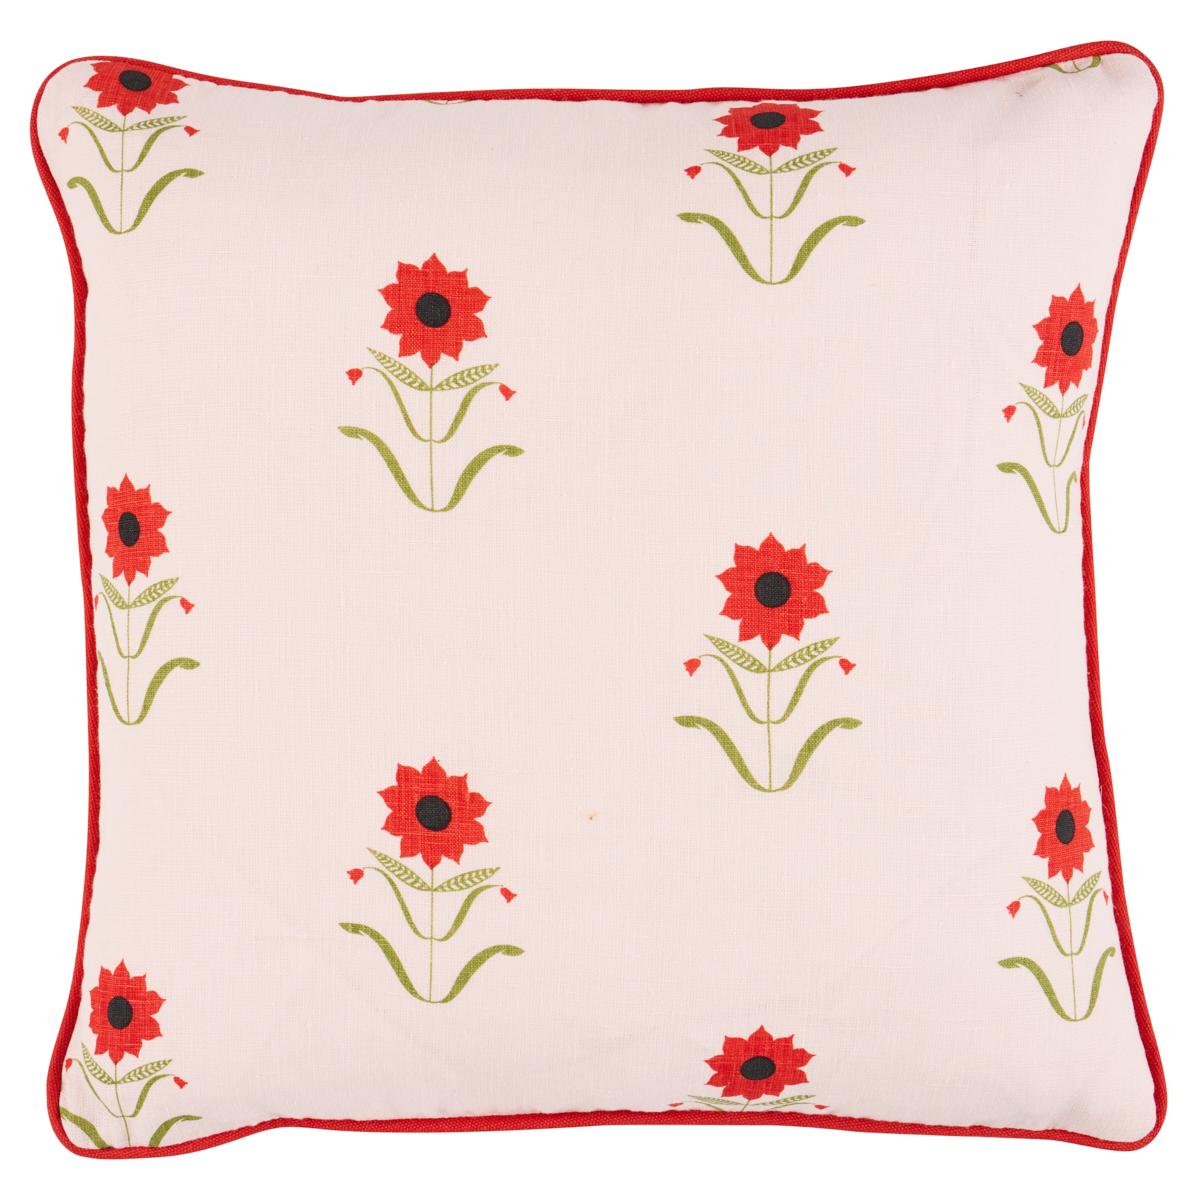 Forget Me Nots Pillow_RED ON PINK